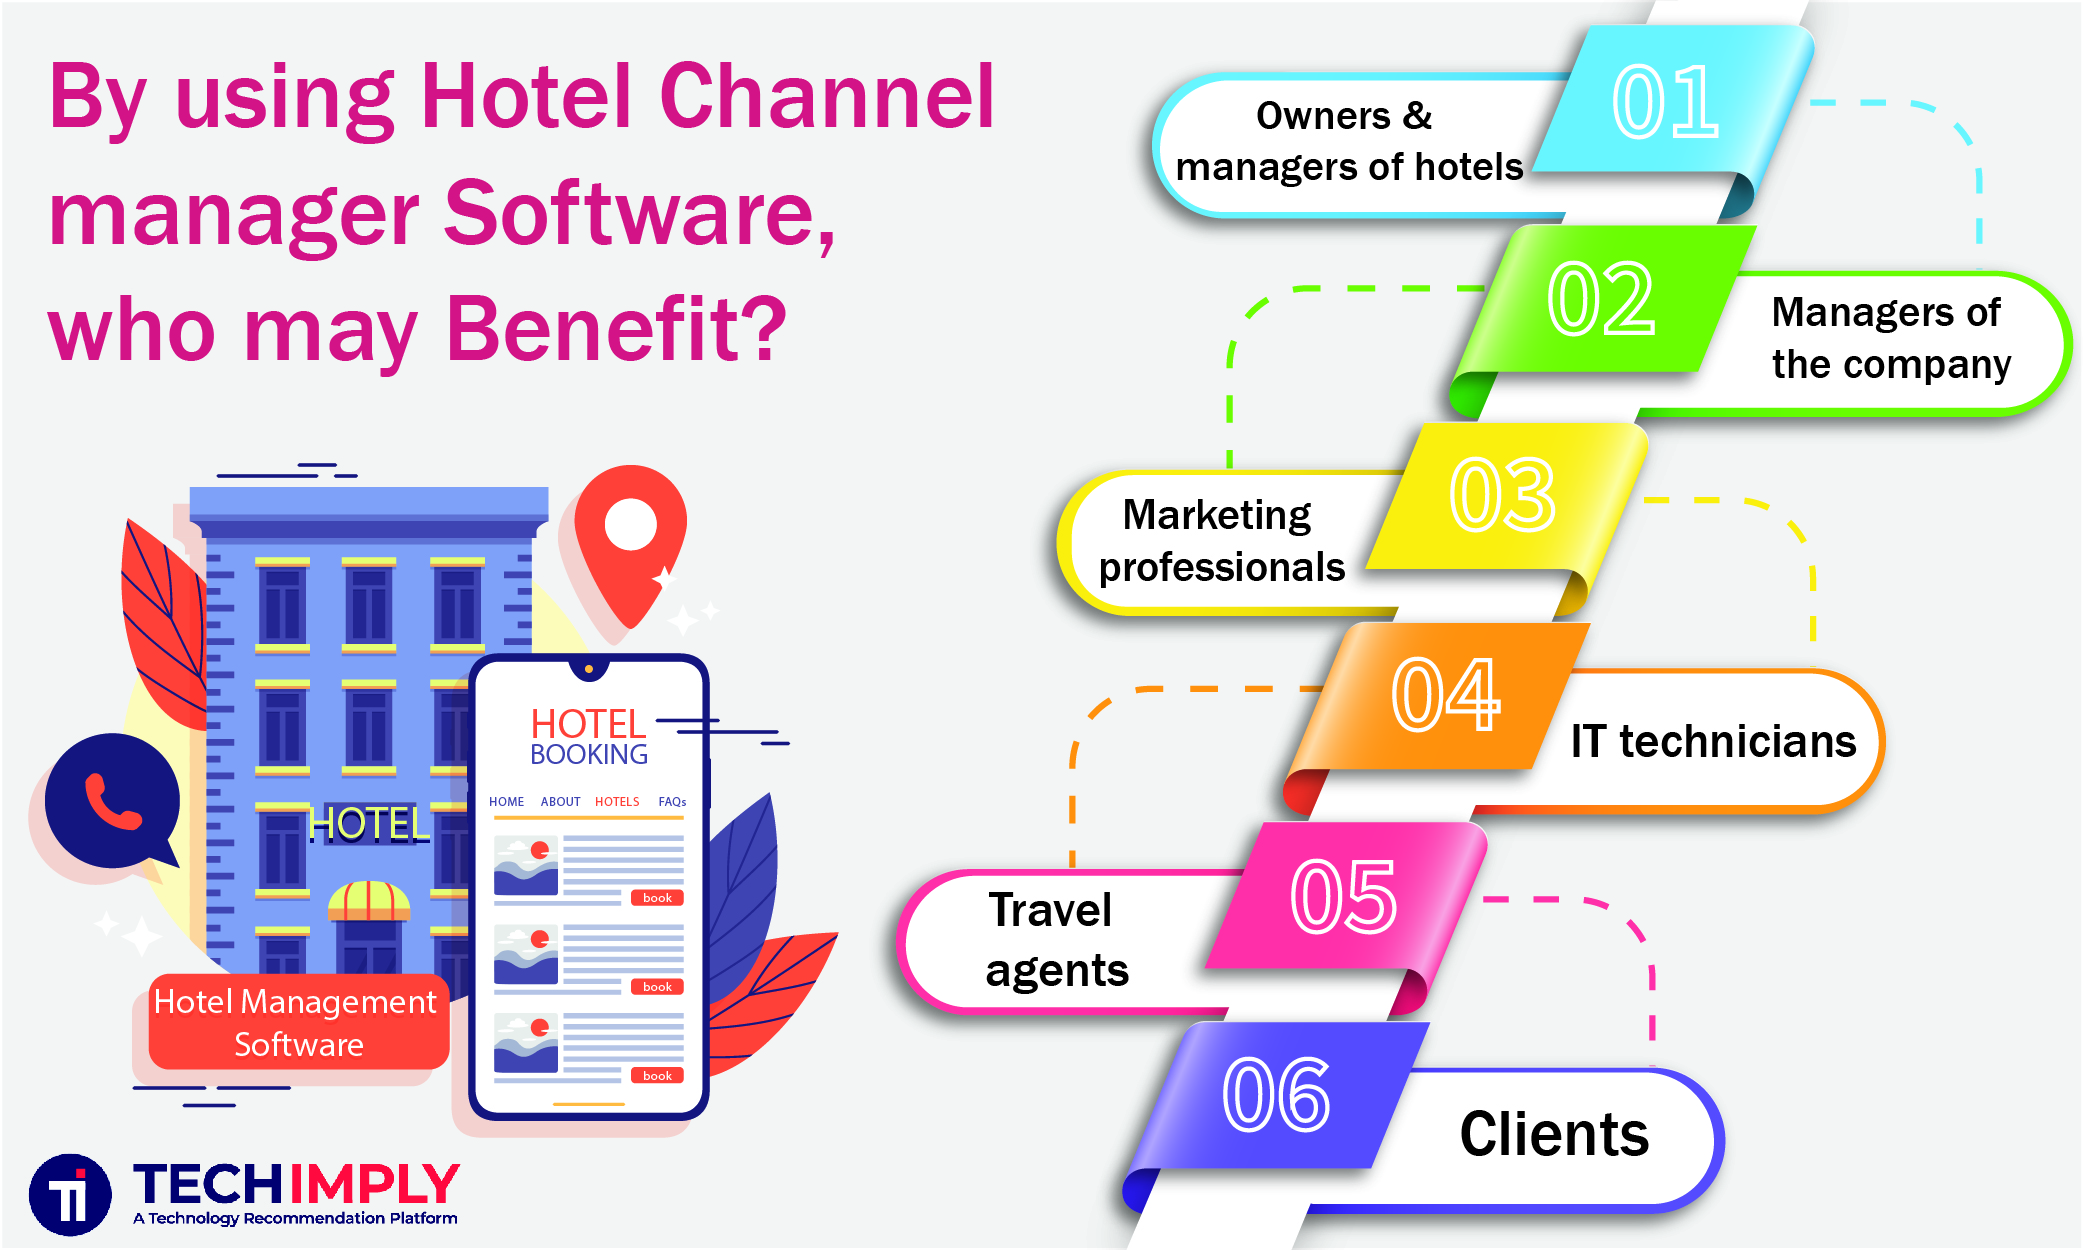 Hotel Channel software